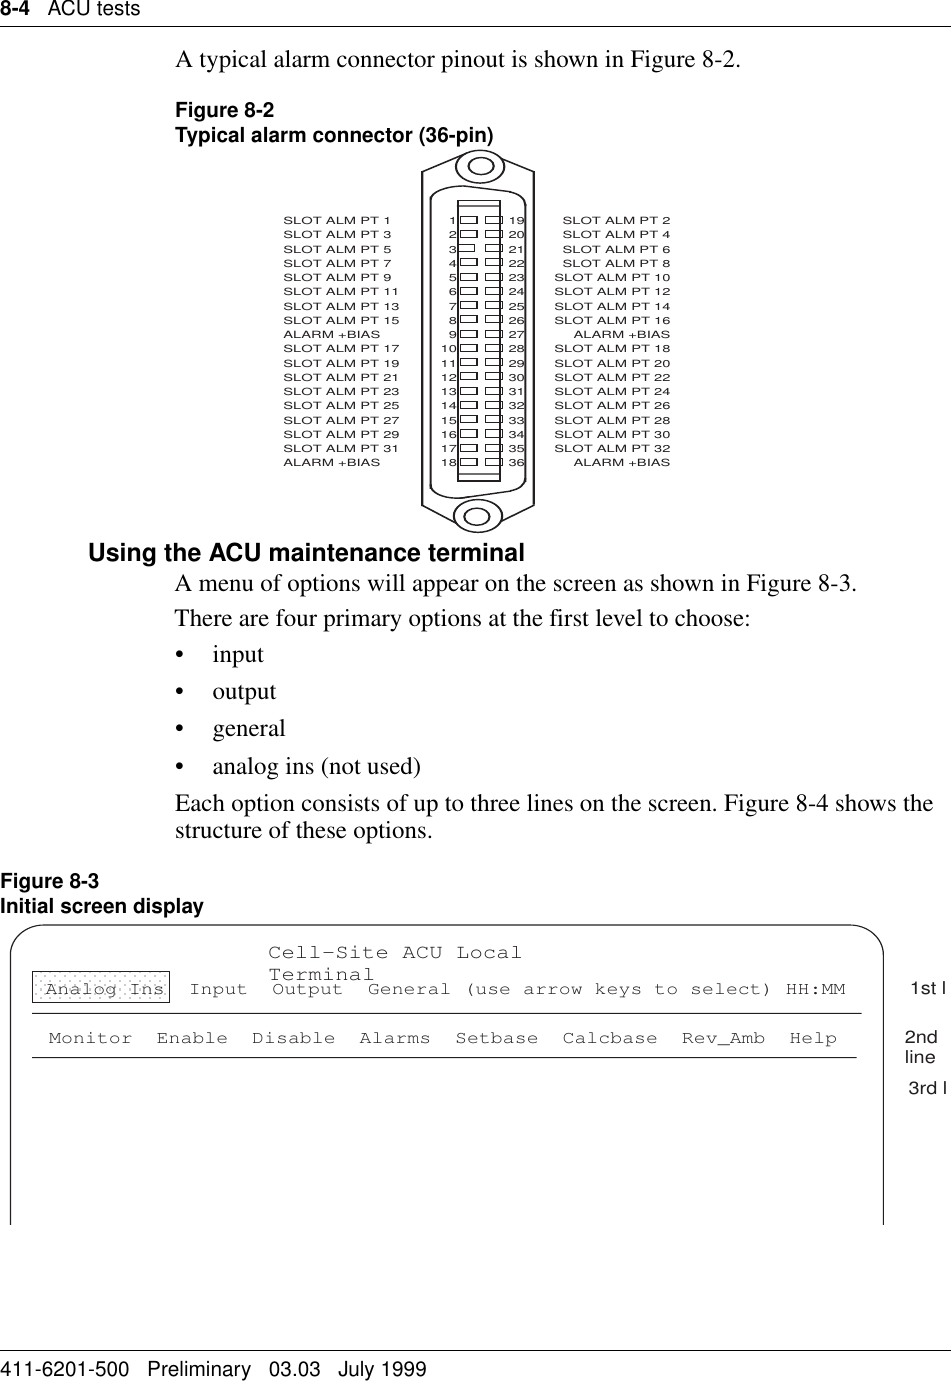 8-4   ACU tests411-6201-500   Preliminary   03.03   July 1999A typical alarm connector pinout is shown in Figure 8-2.Figure 8-2Typical alarm connector (36-pin)Using the ACU maintenance terminalA menu of options will appear on the screen as shown in Figure 8-3.There are four primary options at the first level to choose:• input• output• general• analog ins (not used)Each option consists of up to three lines on the screen. Figure 8-4 shows the structure of these options.Figure 8-3Initial screen displaySLOT ALM PT 1SLOT ALM PT 3SLOT ALM PT 5SLOT ALM PT 7SLOT ALM PT 9SLOT ALM PT 11SLOT ALM PT 13SLOT ALM PT 15ALARM +BIASSLOT ALM PT 17SLOT ALM PT 19SLOT ALM PT 21SLOT ALM PT 23SLOT ALM PT 25SLOT ALM PT 27SLOT ALM PT 29SLOT ALM PT 31ALARM +BIAS123456789101112131415161718192021222324252627282930313233343536SLOT ALM PT 2SLOT ALM PT 4SLOT ALM PT 6SLOT ALM PT 8SLOT ALM PT 10SLOT ALM PT 12SLOT ALM PT 14SLOT ALM PT 16ALARM +BIASSLOT ALM PT 18SLOT ALM PT 20SLOT ALM PT 22SLOT ALM PT 24SLOT ALM PT 26SLOT ALM PT 28SLOT ALM PT 30SLOT ALM PT 32ALARM +BIASCell-Site ACU Local TerminalMonitor  Enable  Disable  Alarms  Setbase  Calcbase  Rev_Amb  Help1st l2nd line3rd lAnalog Ins  Input  Output  General (use arrow keys to select) HH:MM